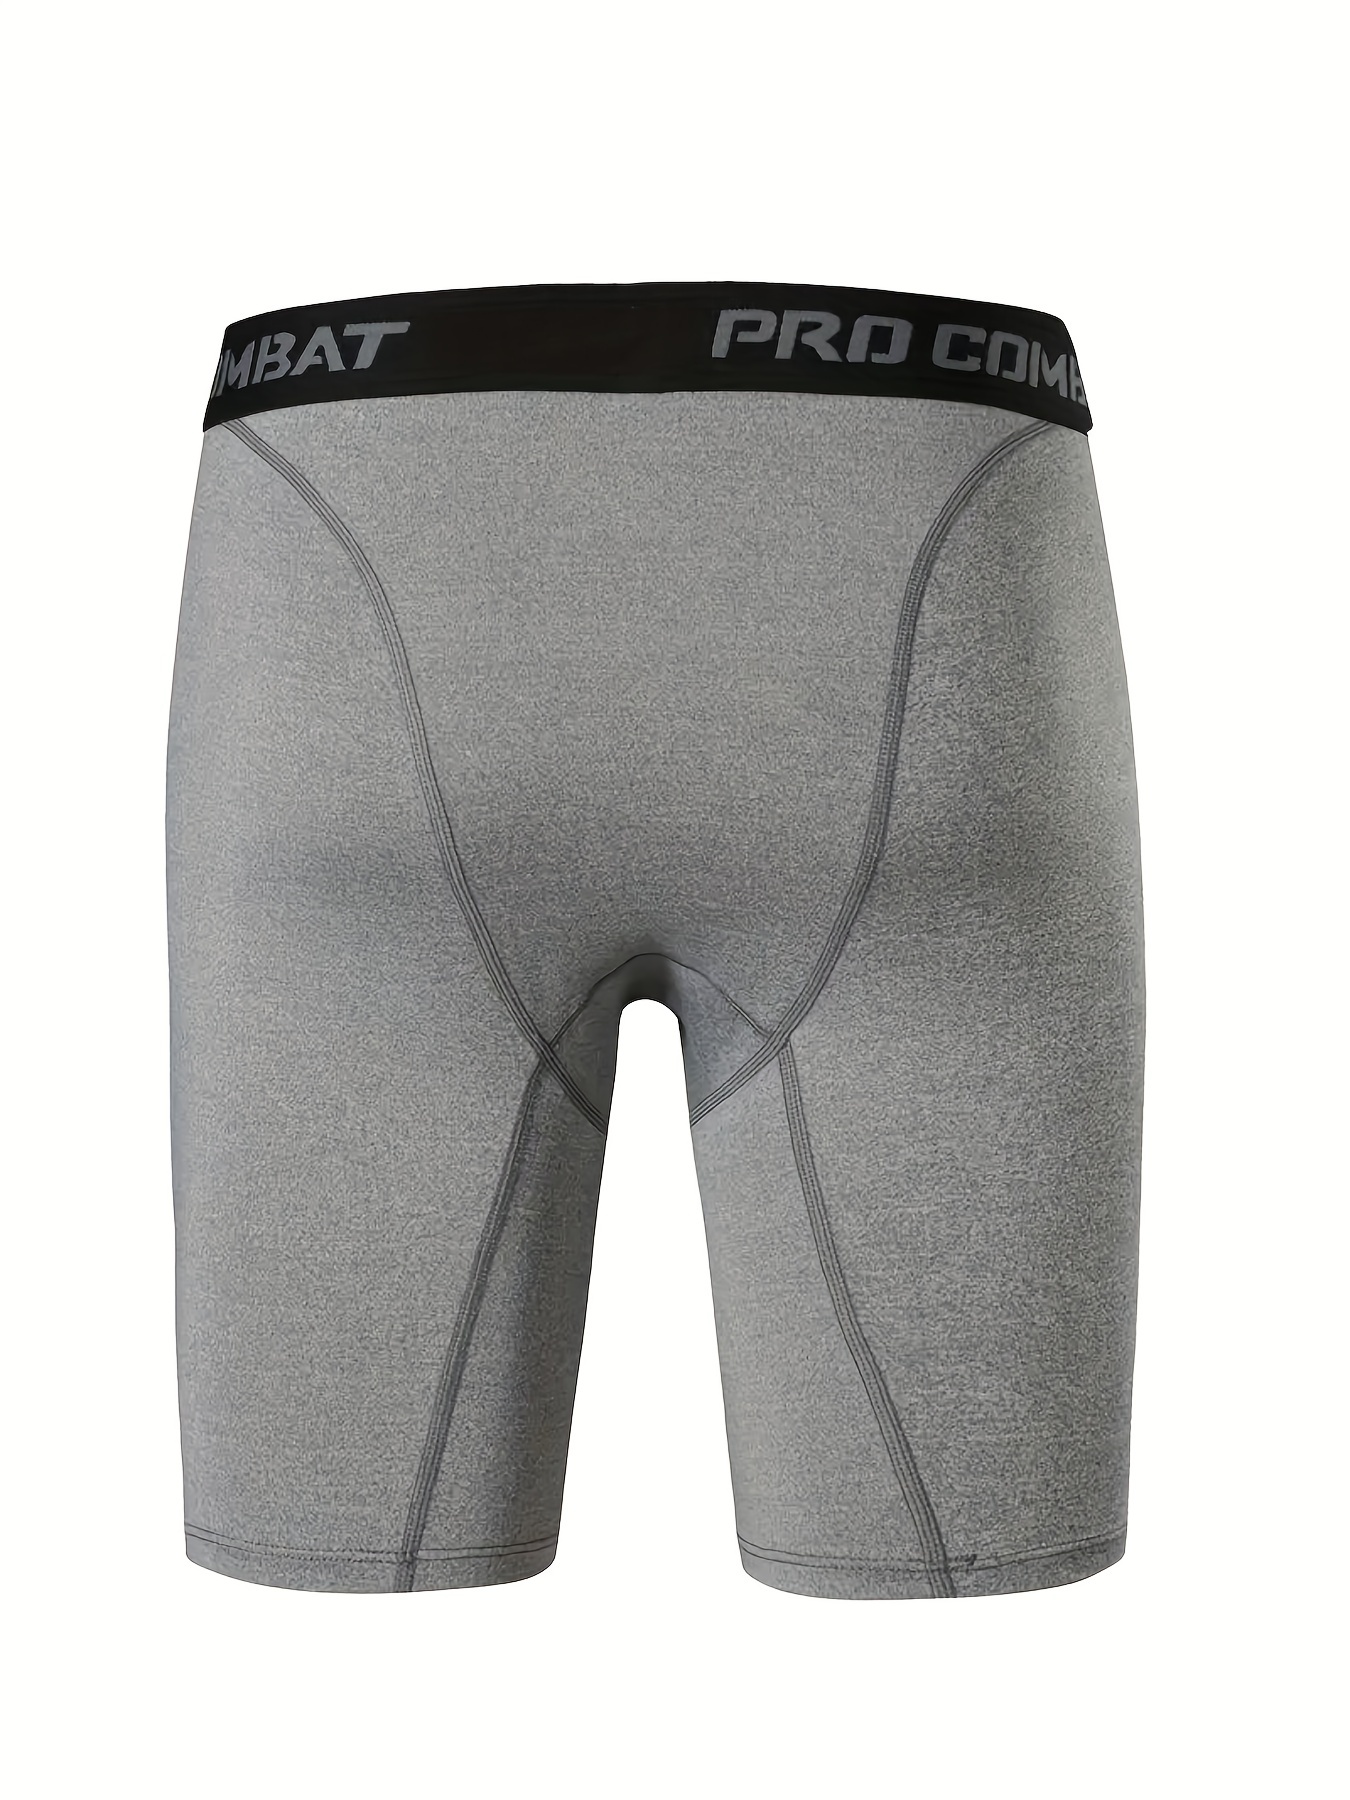 Mens Compression Underwear: 3D Print Tight Boxers With High Elasticity,  Quick Dry Wicking, And Sport Fitness Shorts Gym Compression Shorts 4005  From Qinchaoqin, $12.51